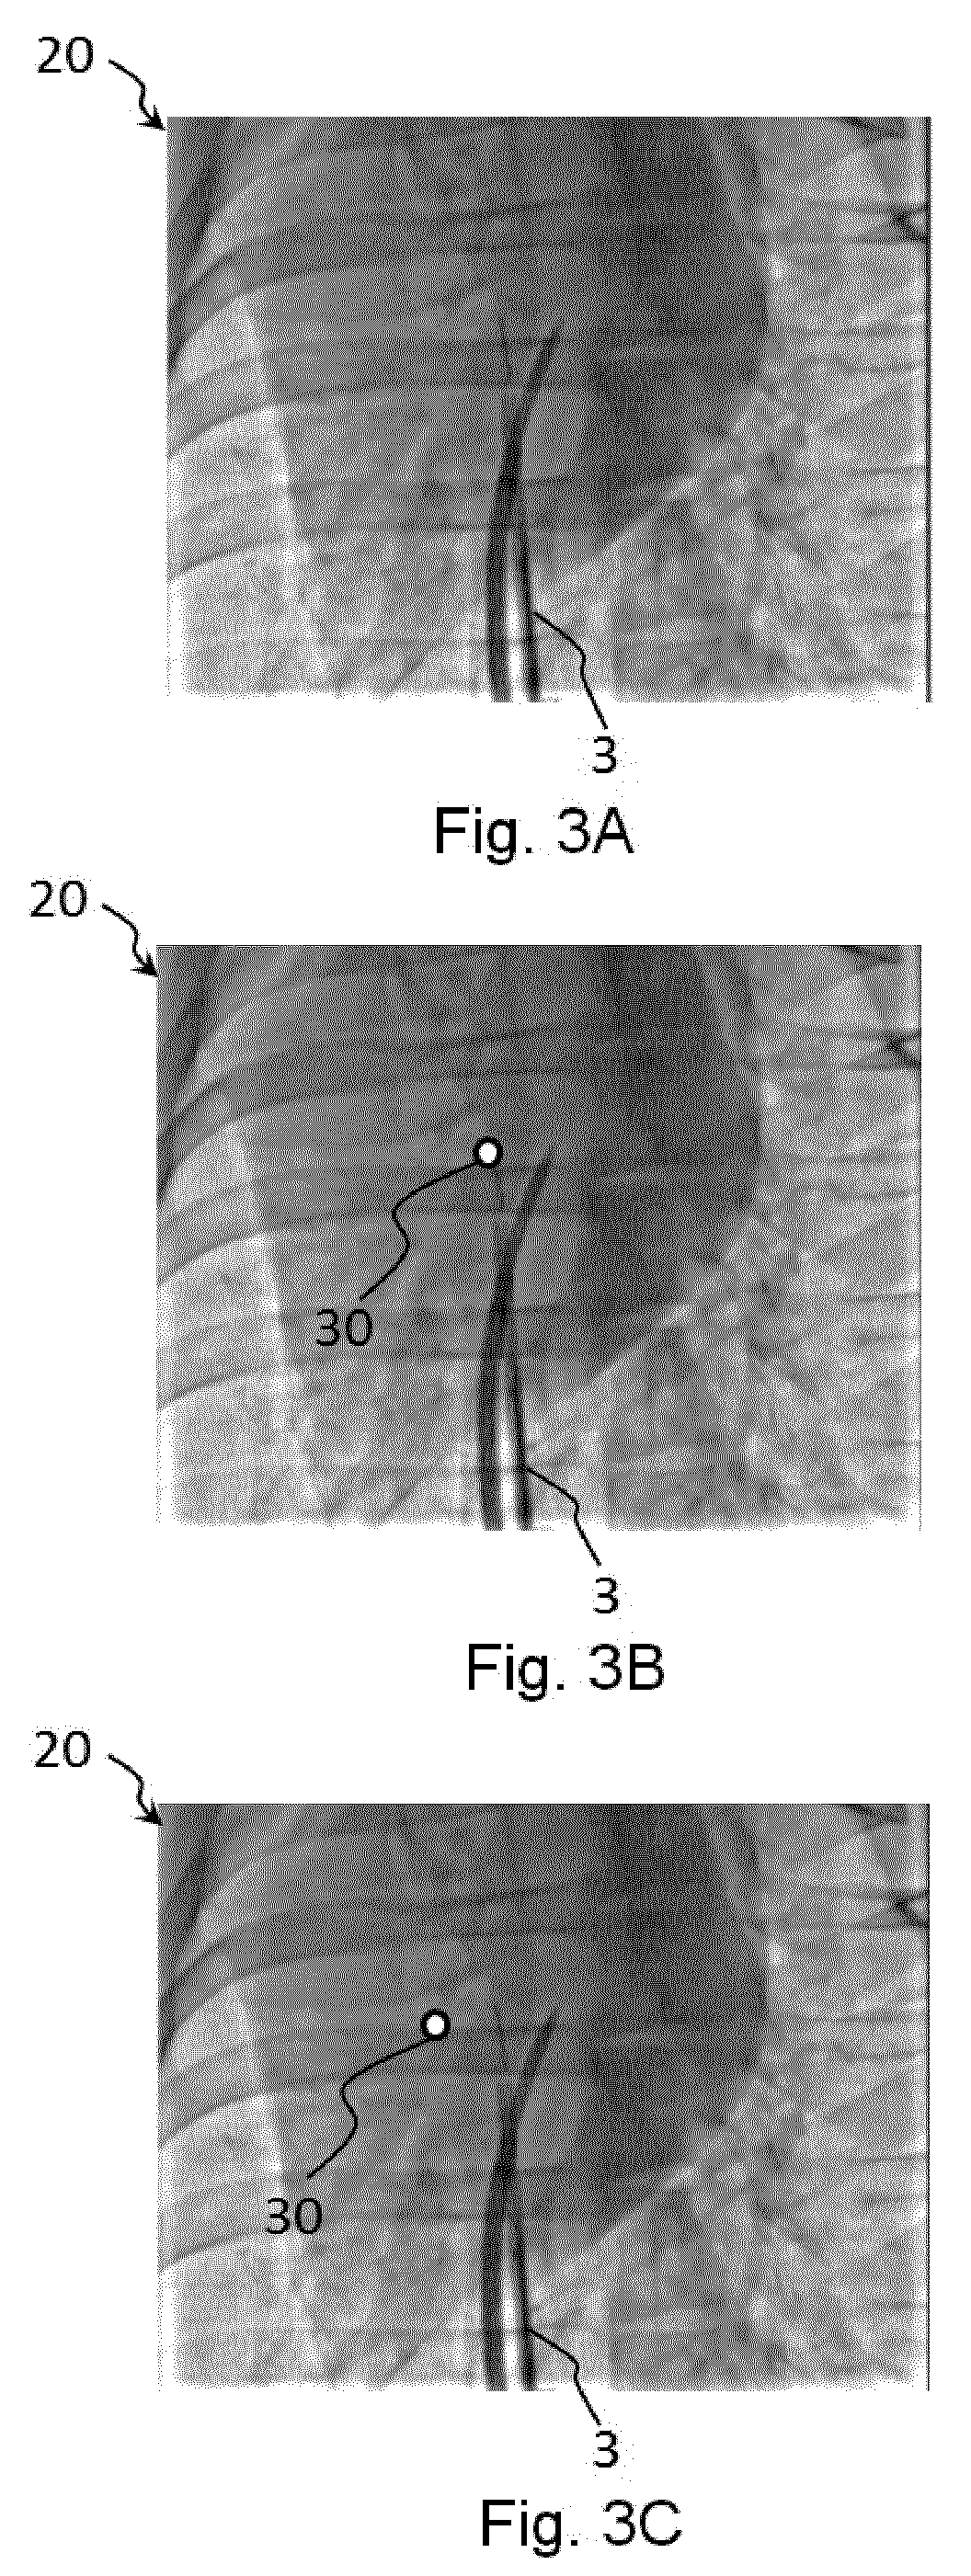 Visualization of an image object relating to an instrucment in an extracorporeal image